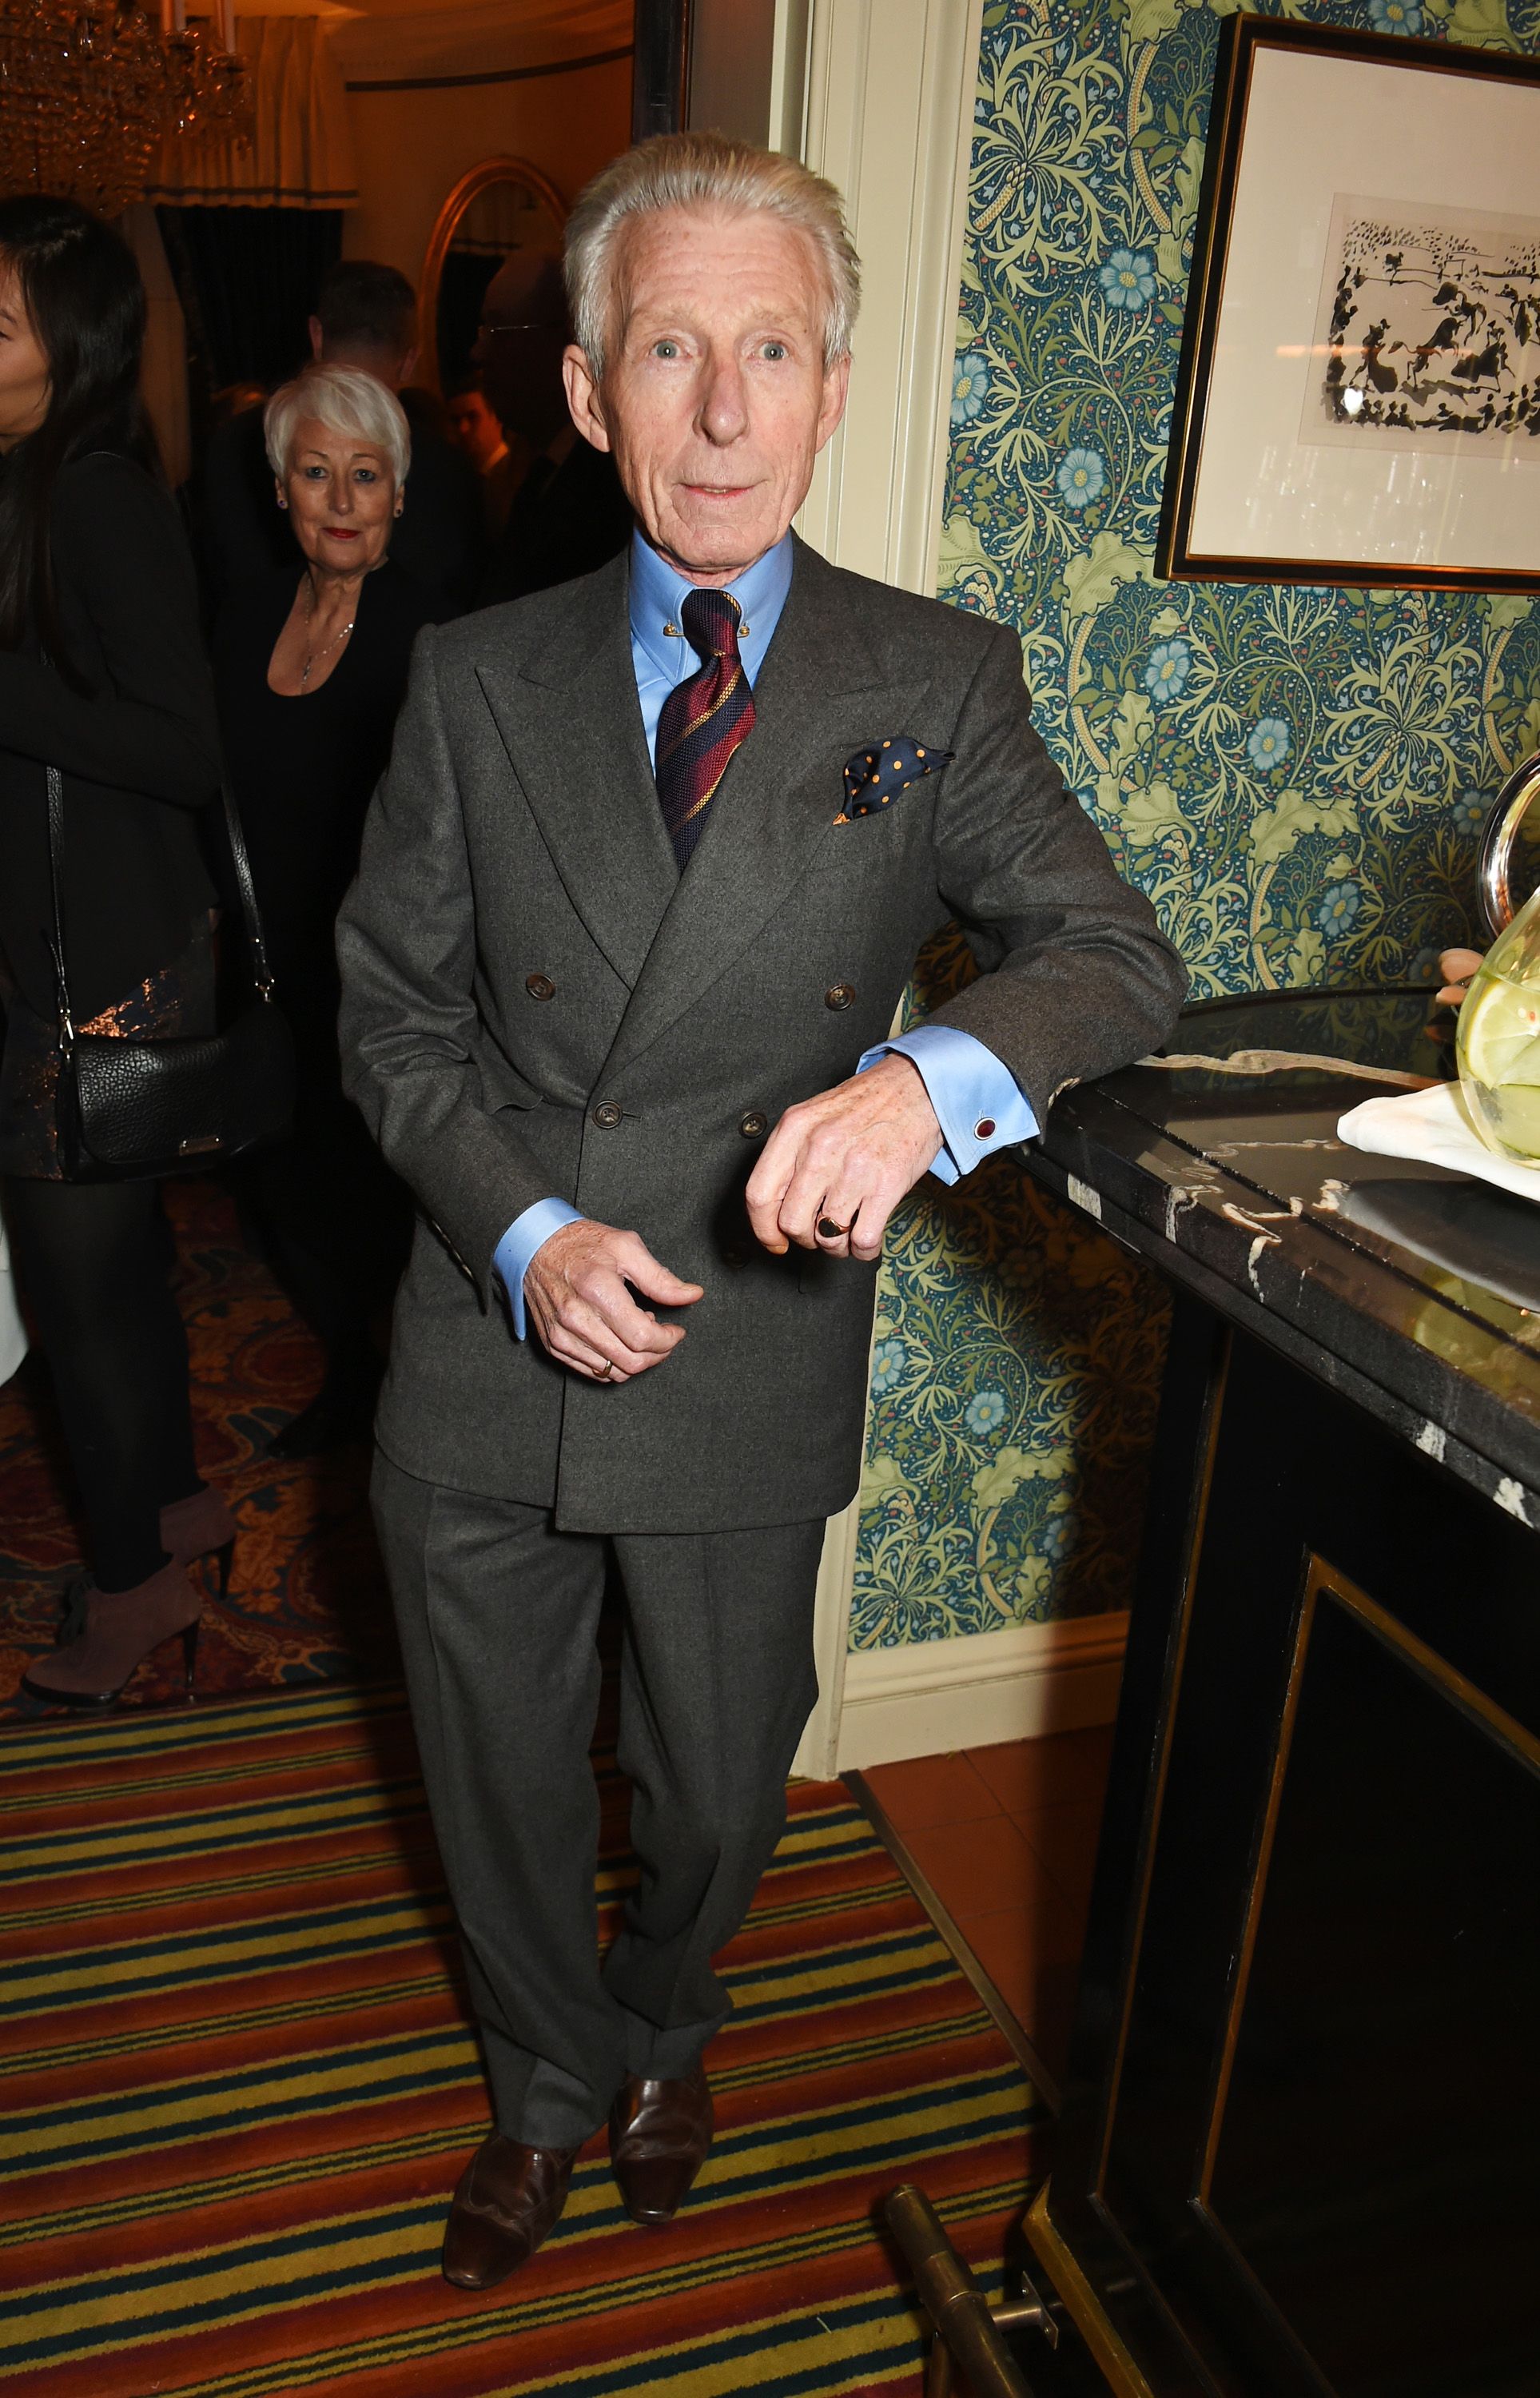 Savile Row tailors: The ultimate gentleman's guide